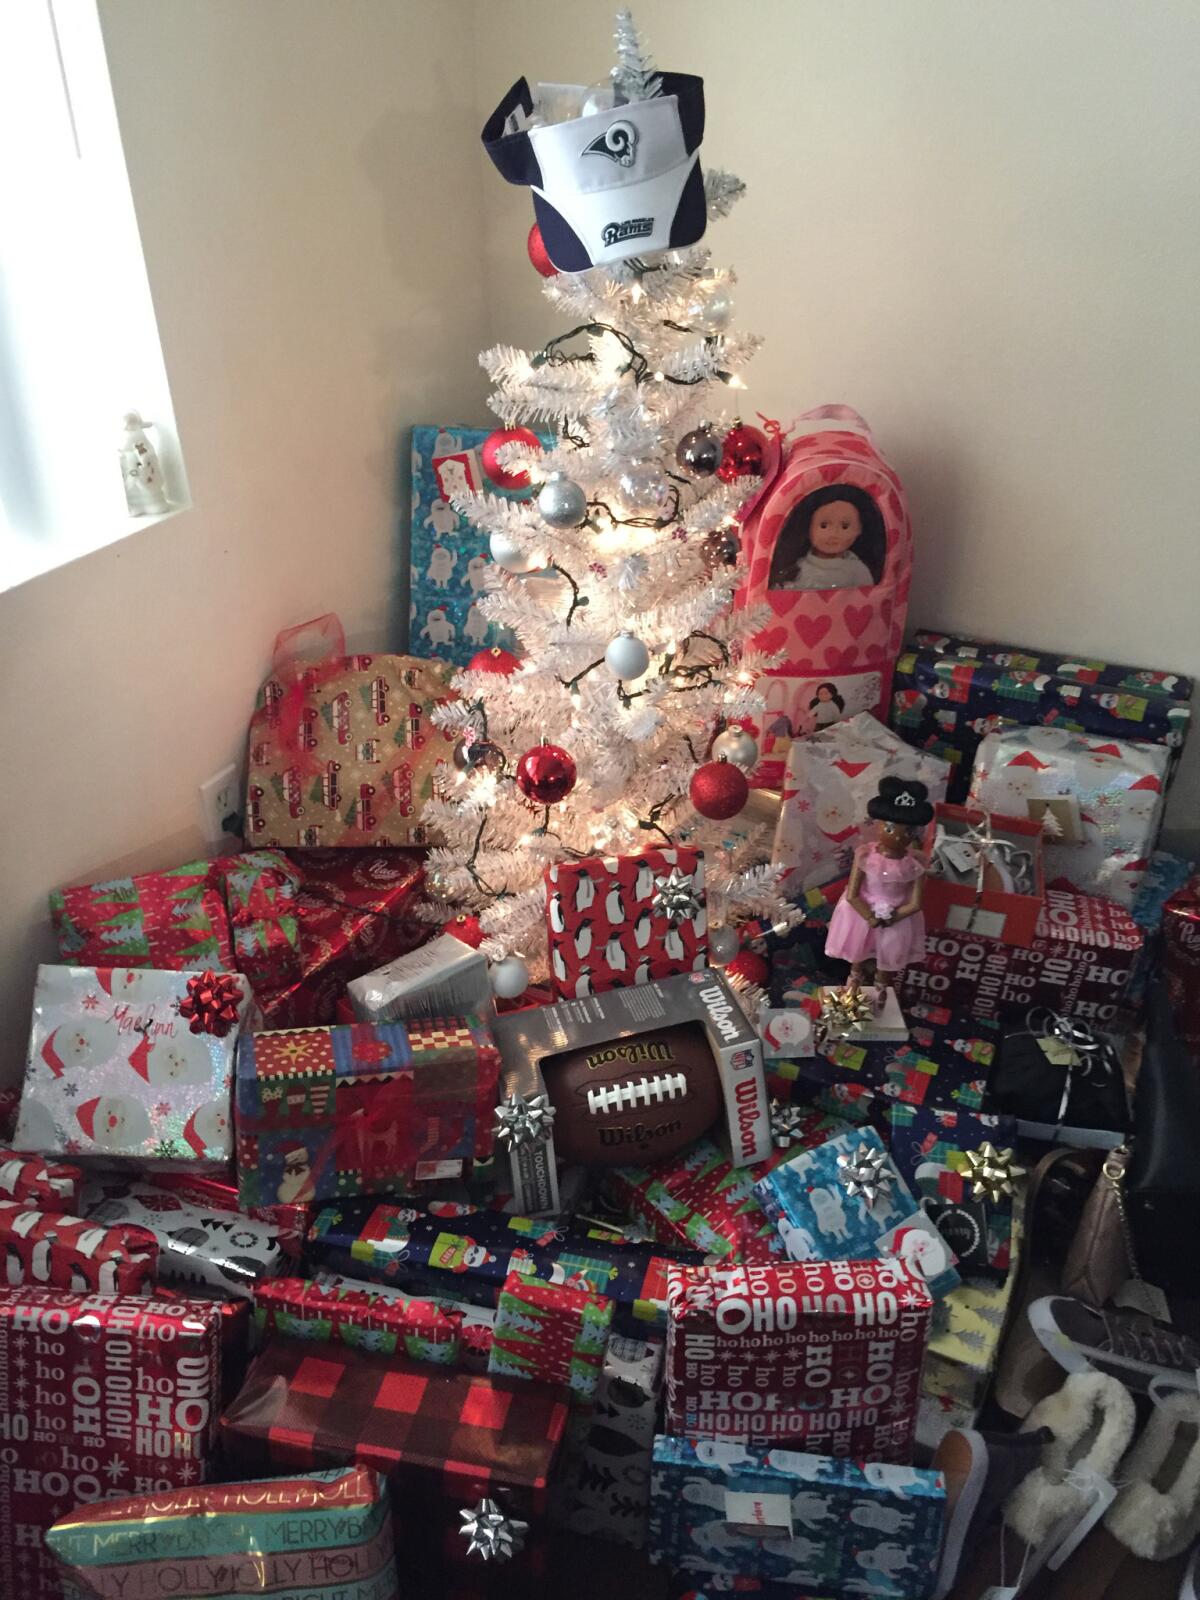 Tavon Austin and Robert Quinn purchased gifts that were wrapped and sitting beneath a small tree, ready to be opened.